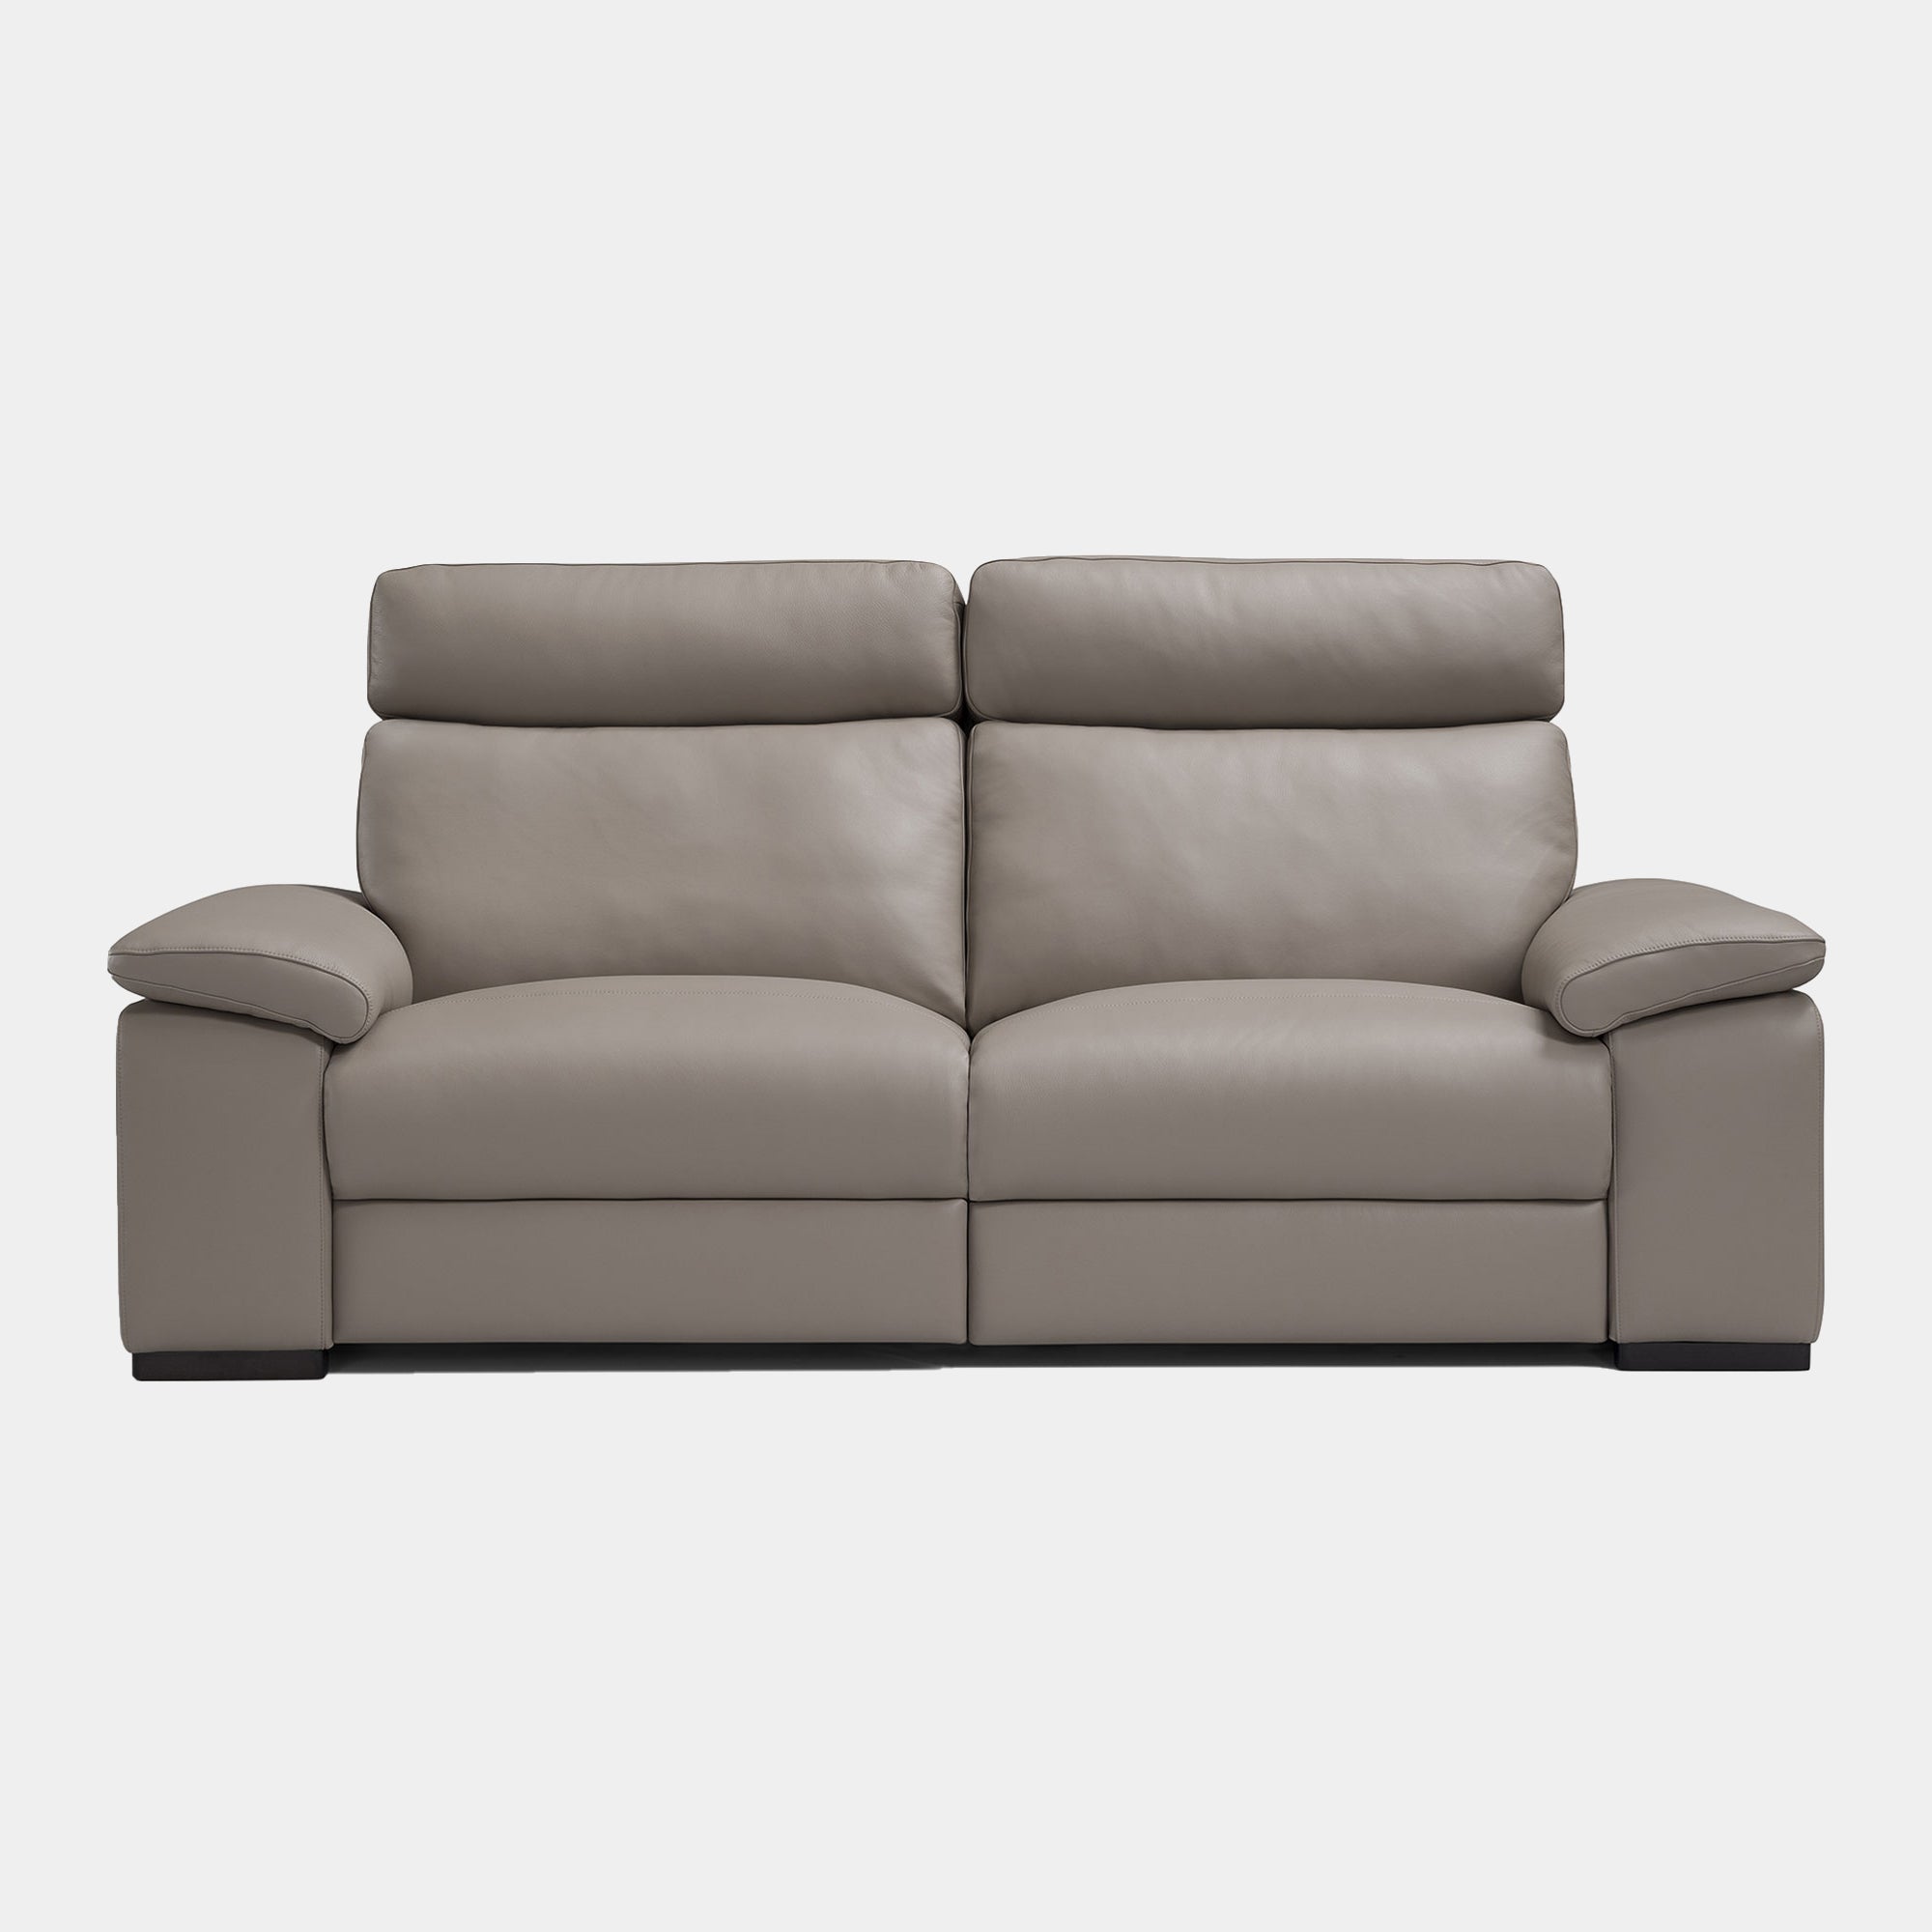 Varese - 3 Seat Sofa With 2 Power Recliners In Leather Cat L20